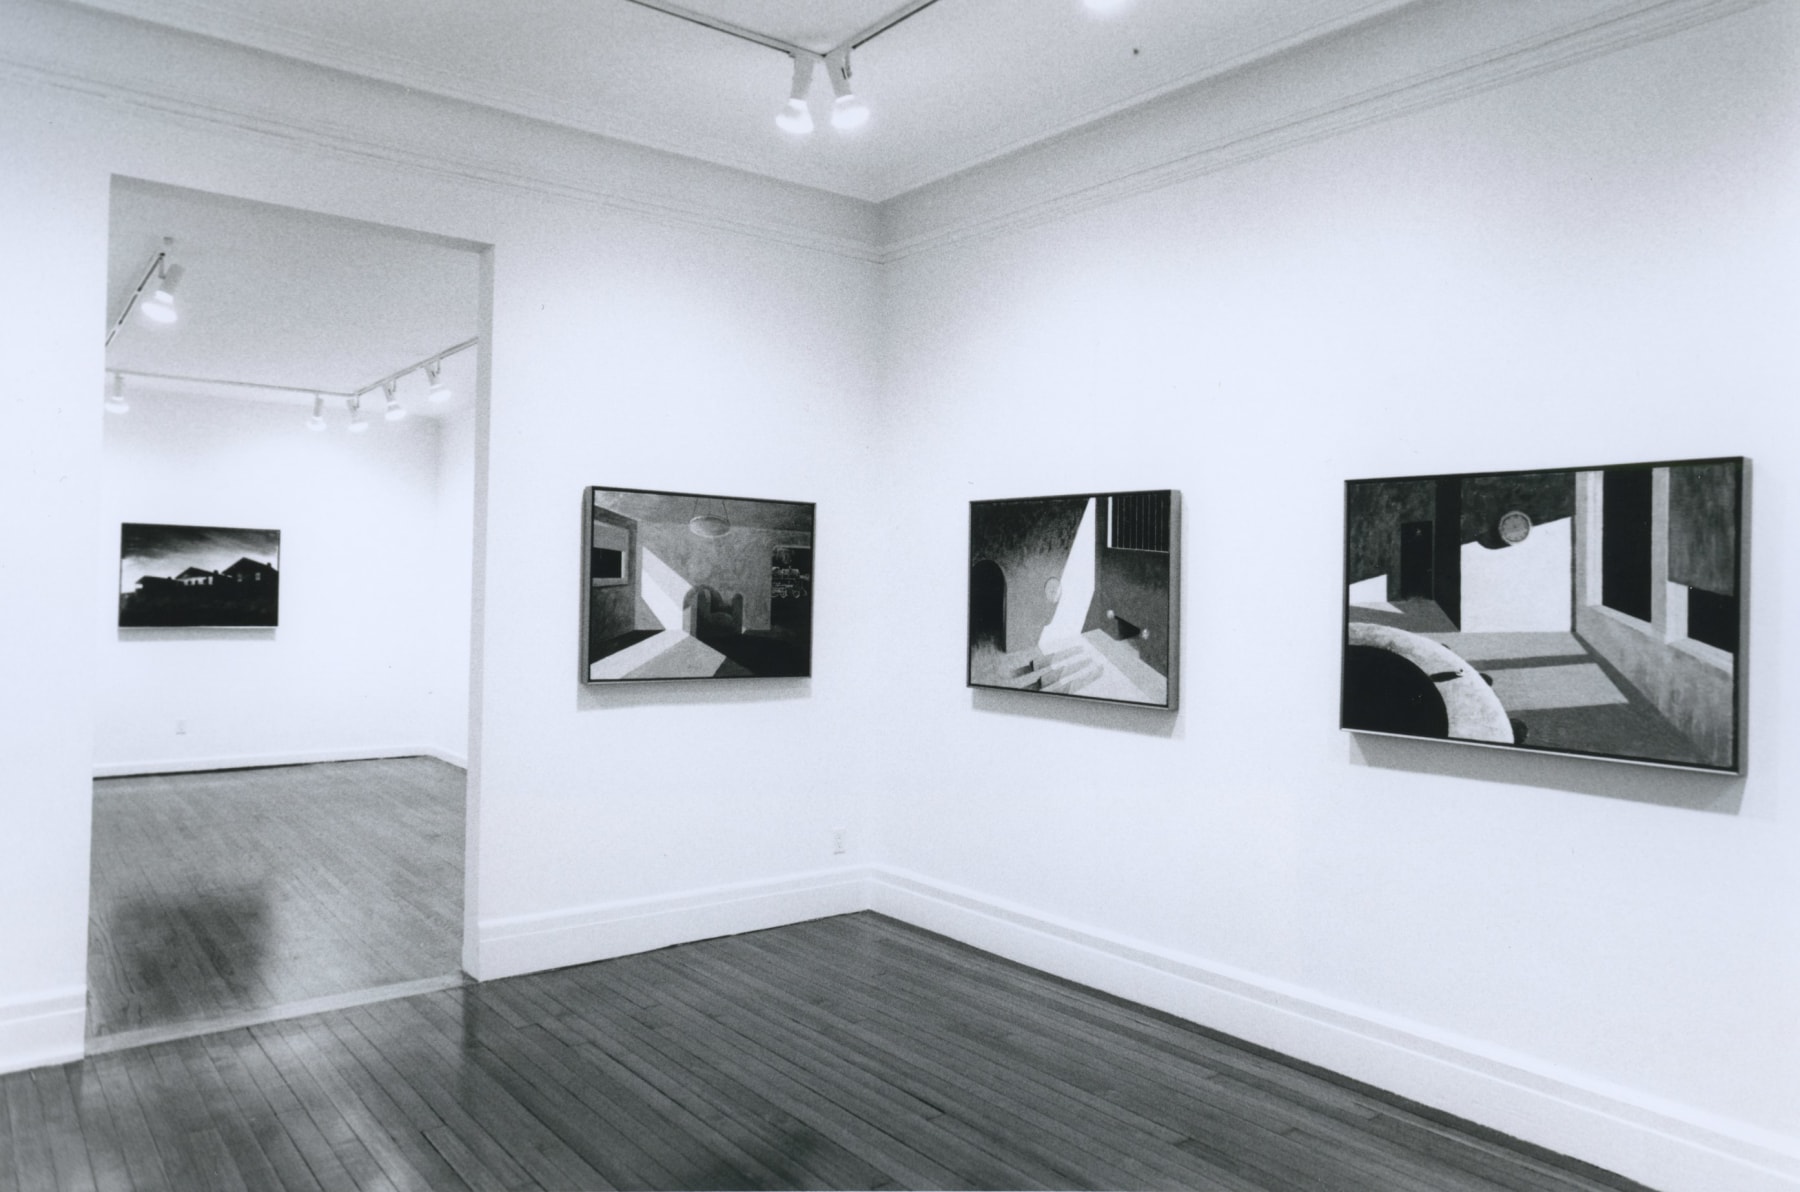 Installation view, Robert Morris: Small Fires and Mnemonic Nights, 18 EAST 77